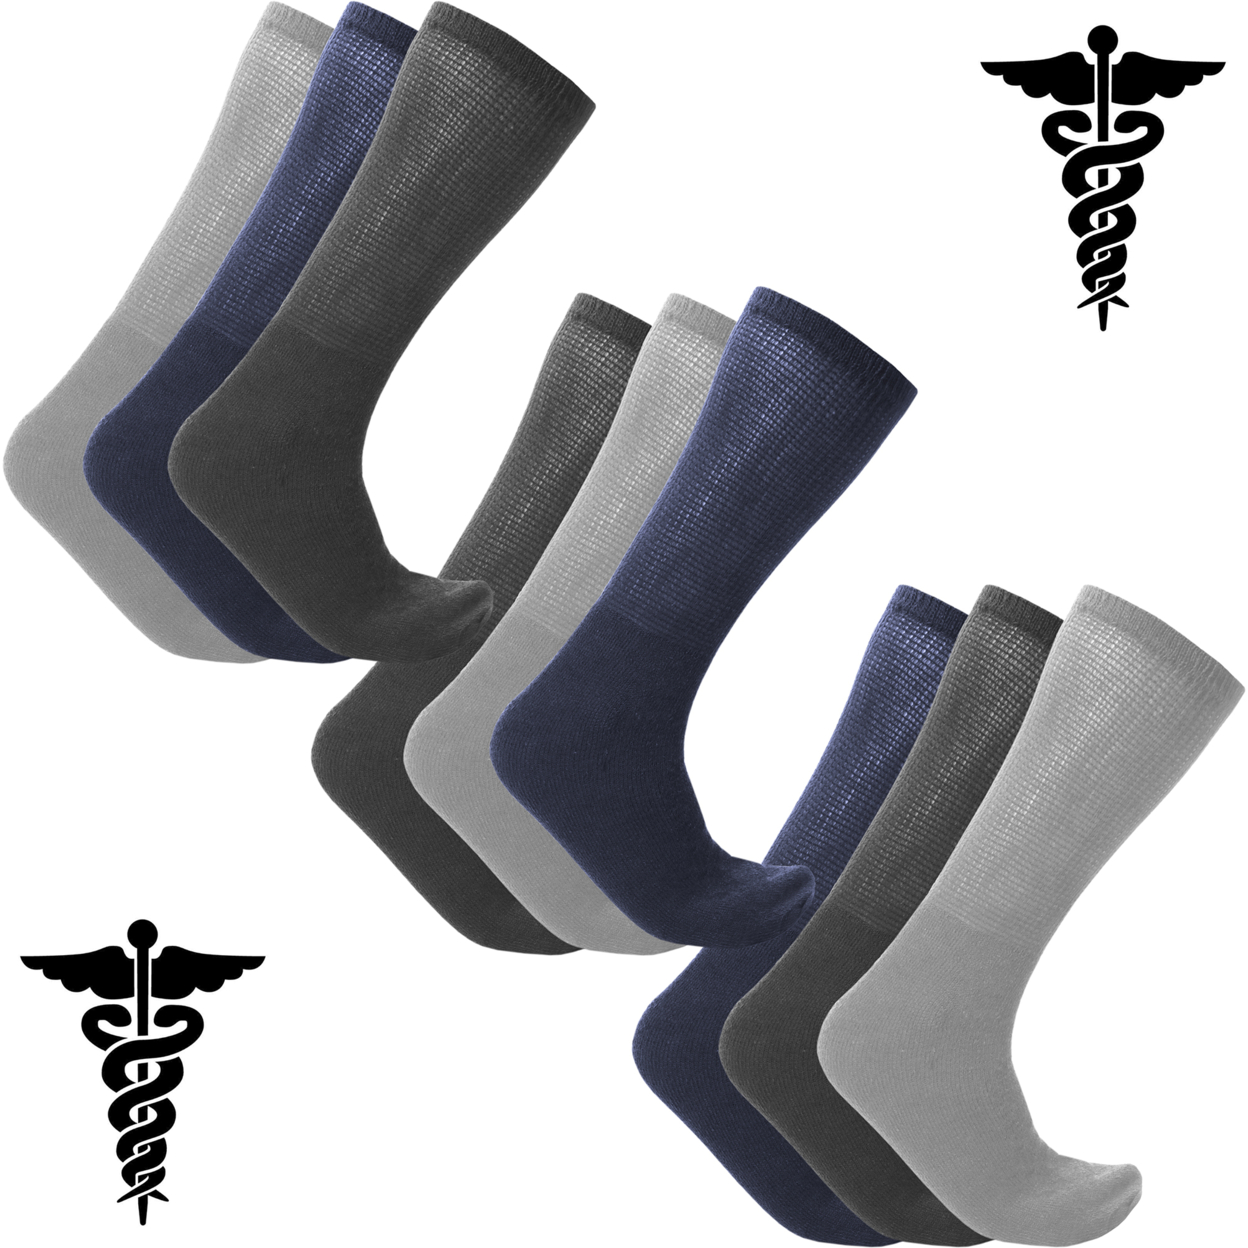 6-Pairs: Physician Approved Therapeutic Diabetic Socks - Assorted, Men's